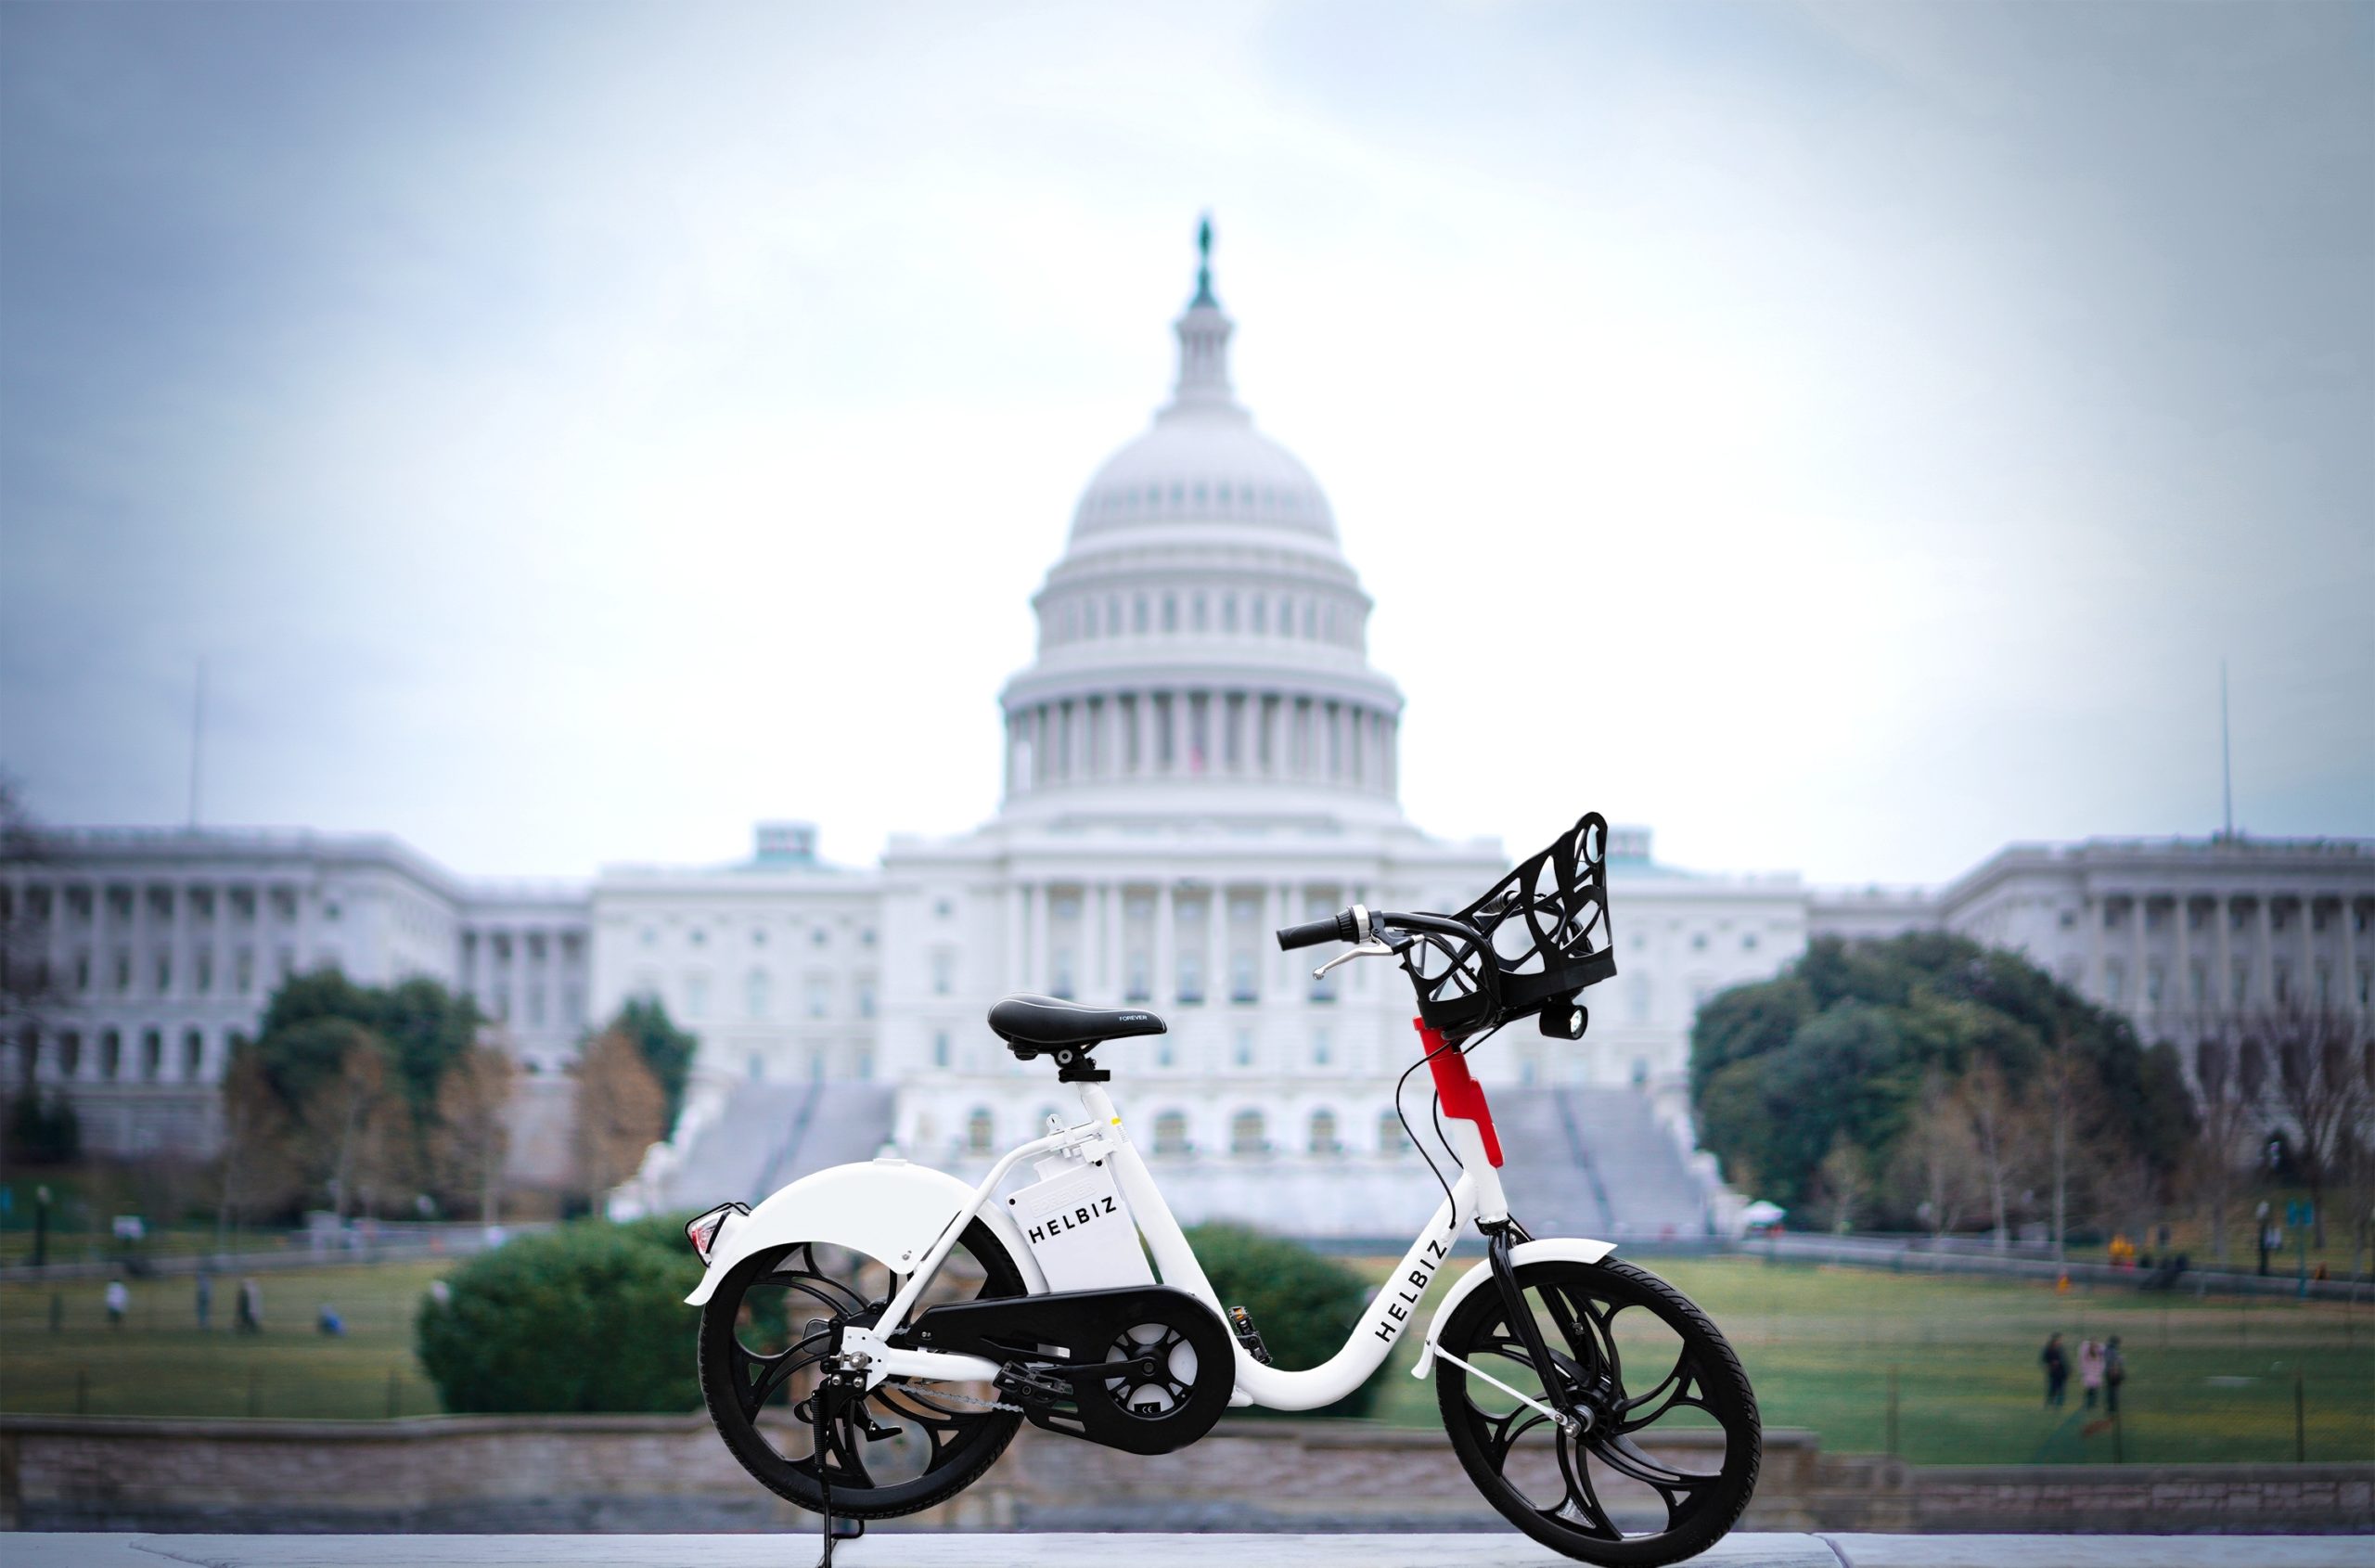 Micro-Mobility Leader, Helbiz, Awarded Permit to Operate e-Bikes in Washington, D.C.